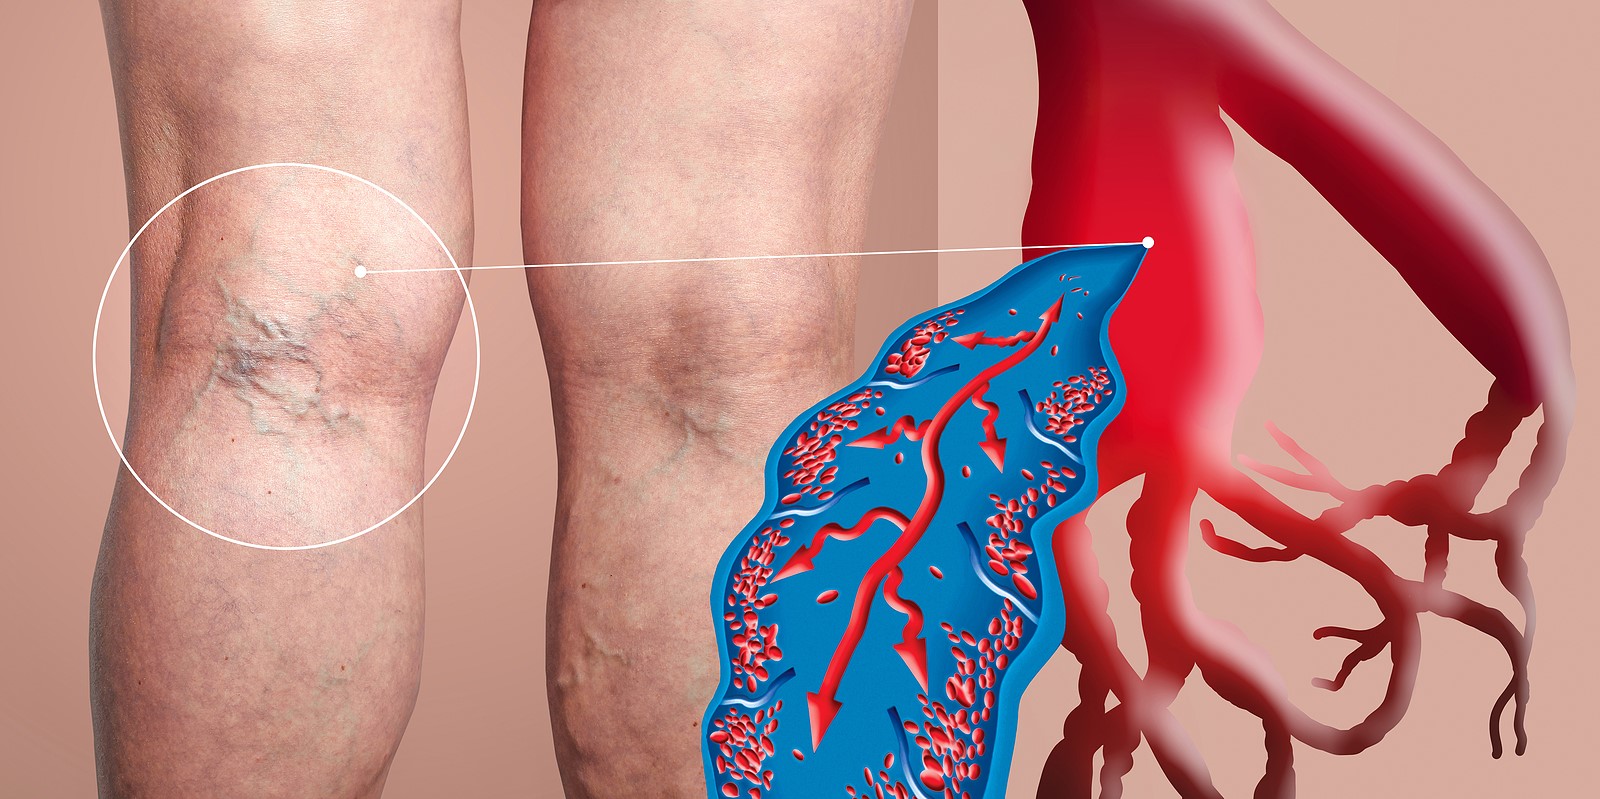 Deep Vein Thrombosis: What is it, Causes, Prevention, and More